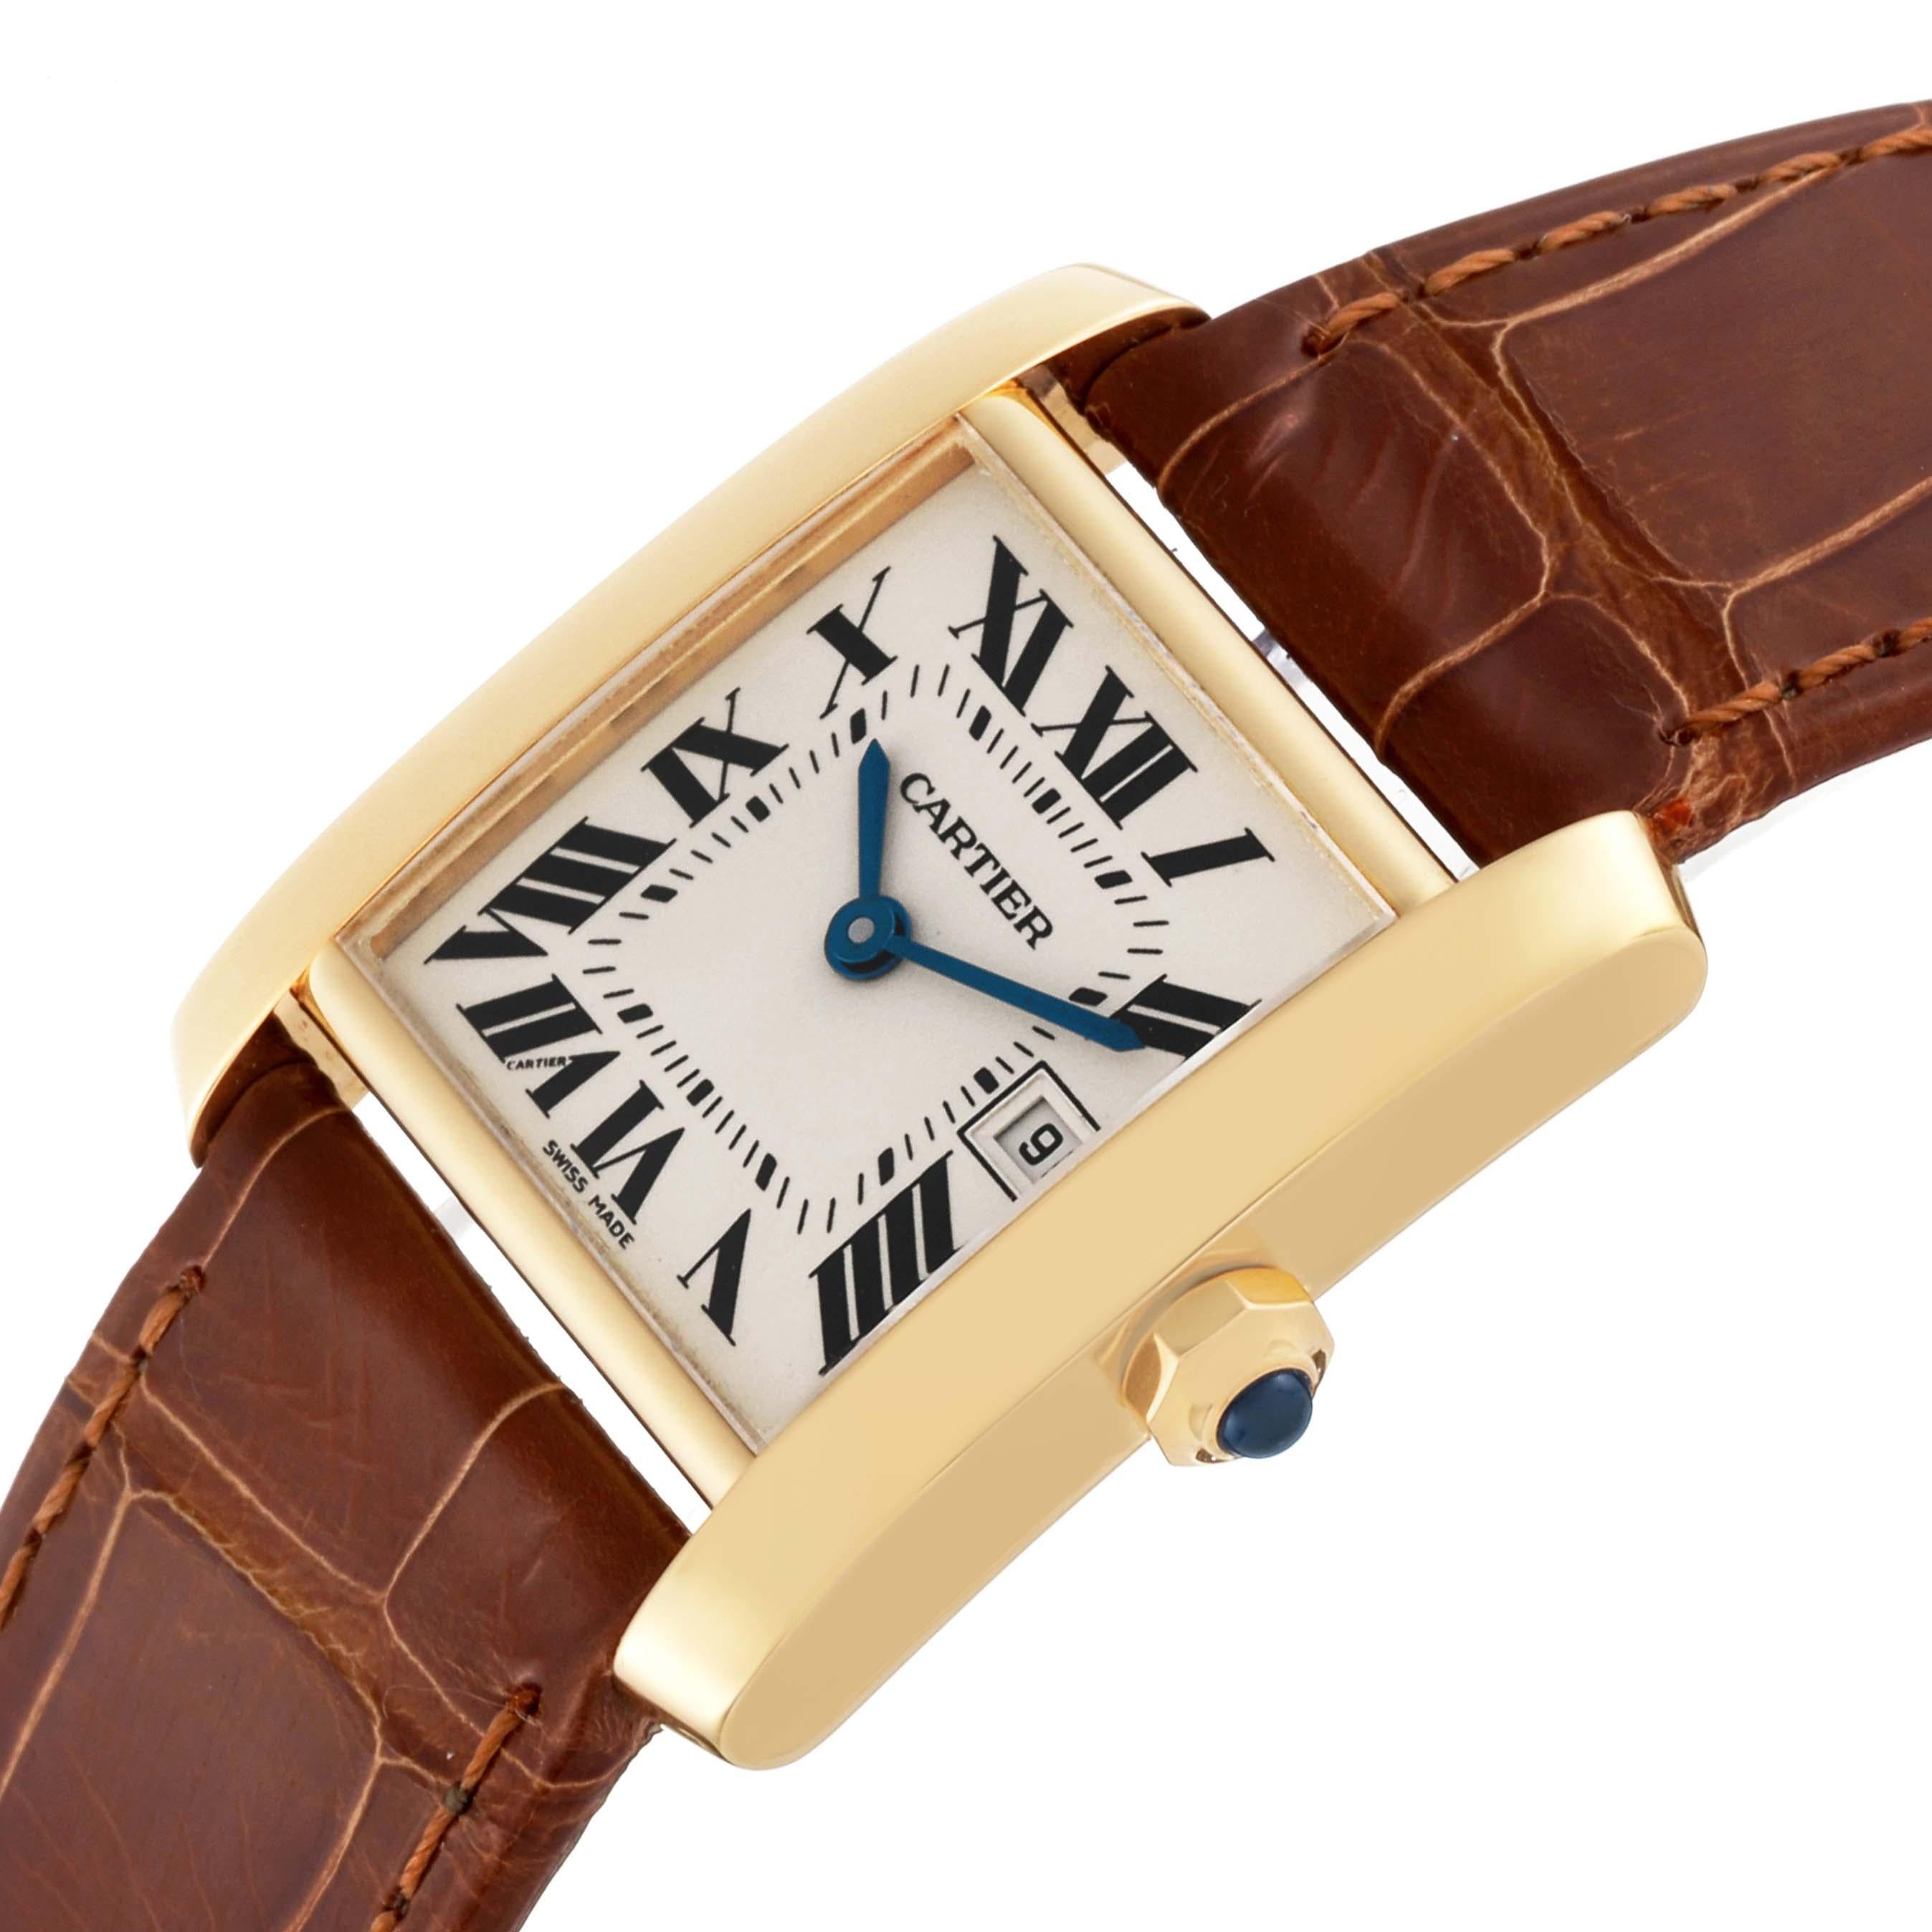 Cartier Tank Francaise Midsize Yellow Gold Ladies Watch W5001456. Quartz movement. 18K yellow gold 25 x 29 mm case. Octagonal crown set with a blue sapphire cabochon. . Scratch resistant sapphire crystal. Silver grained dial with black radial Roman